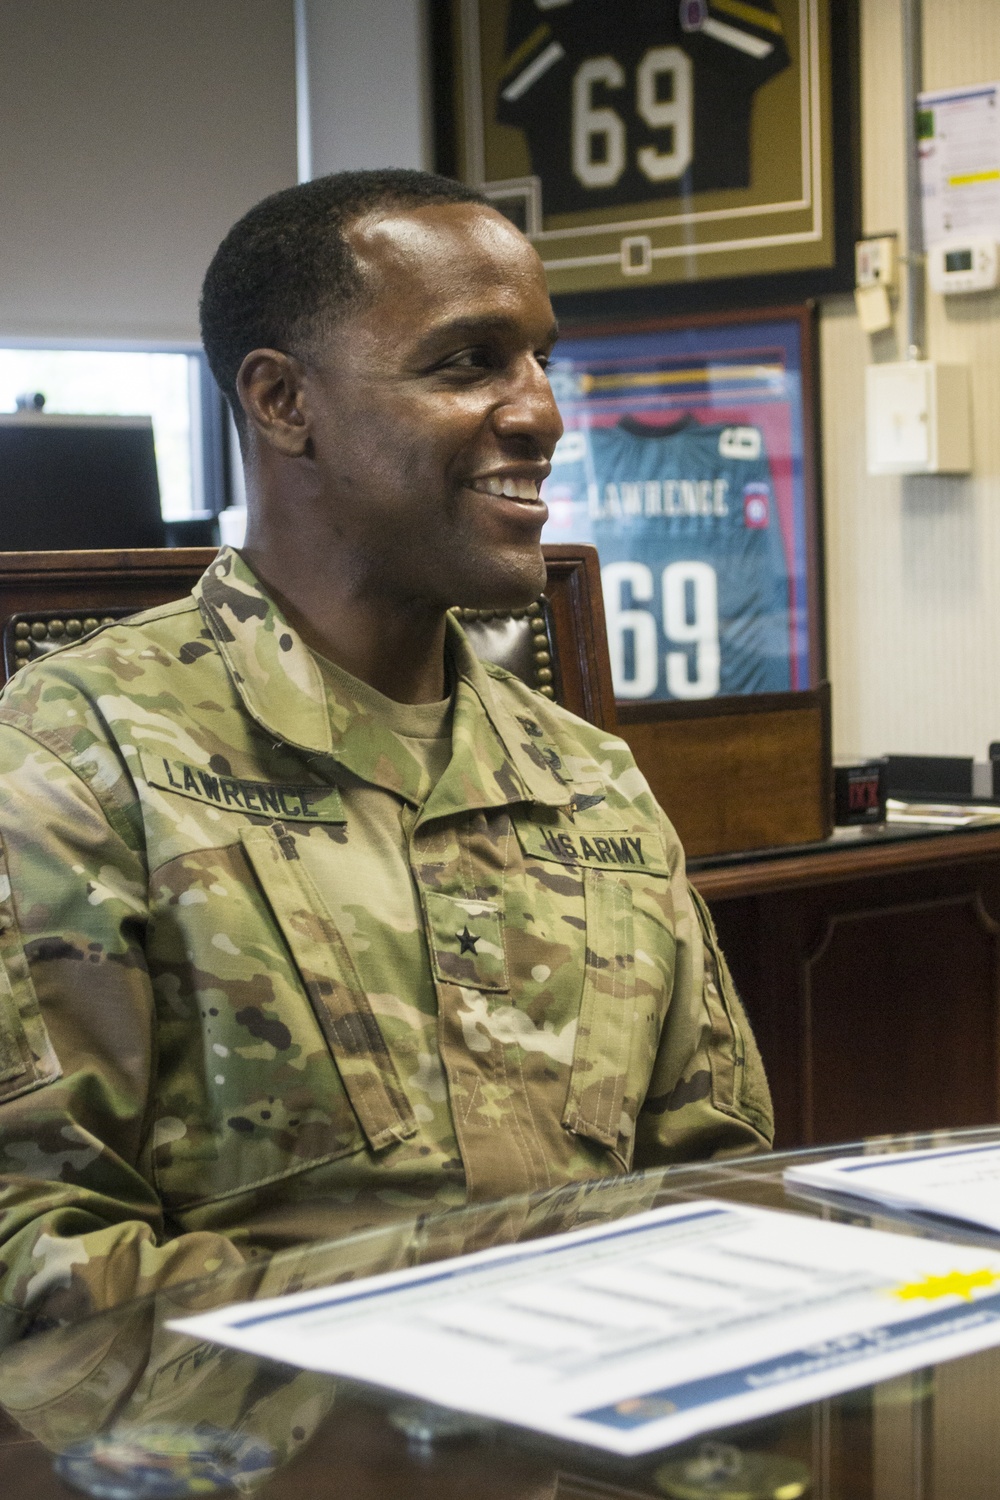 Meet the commander: An interview with DLA Troop Support’s newest leader